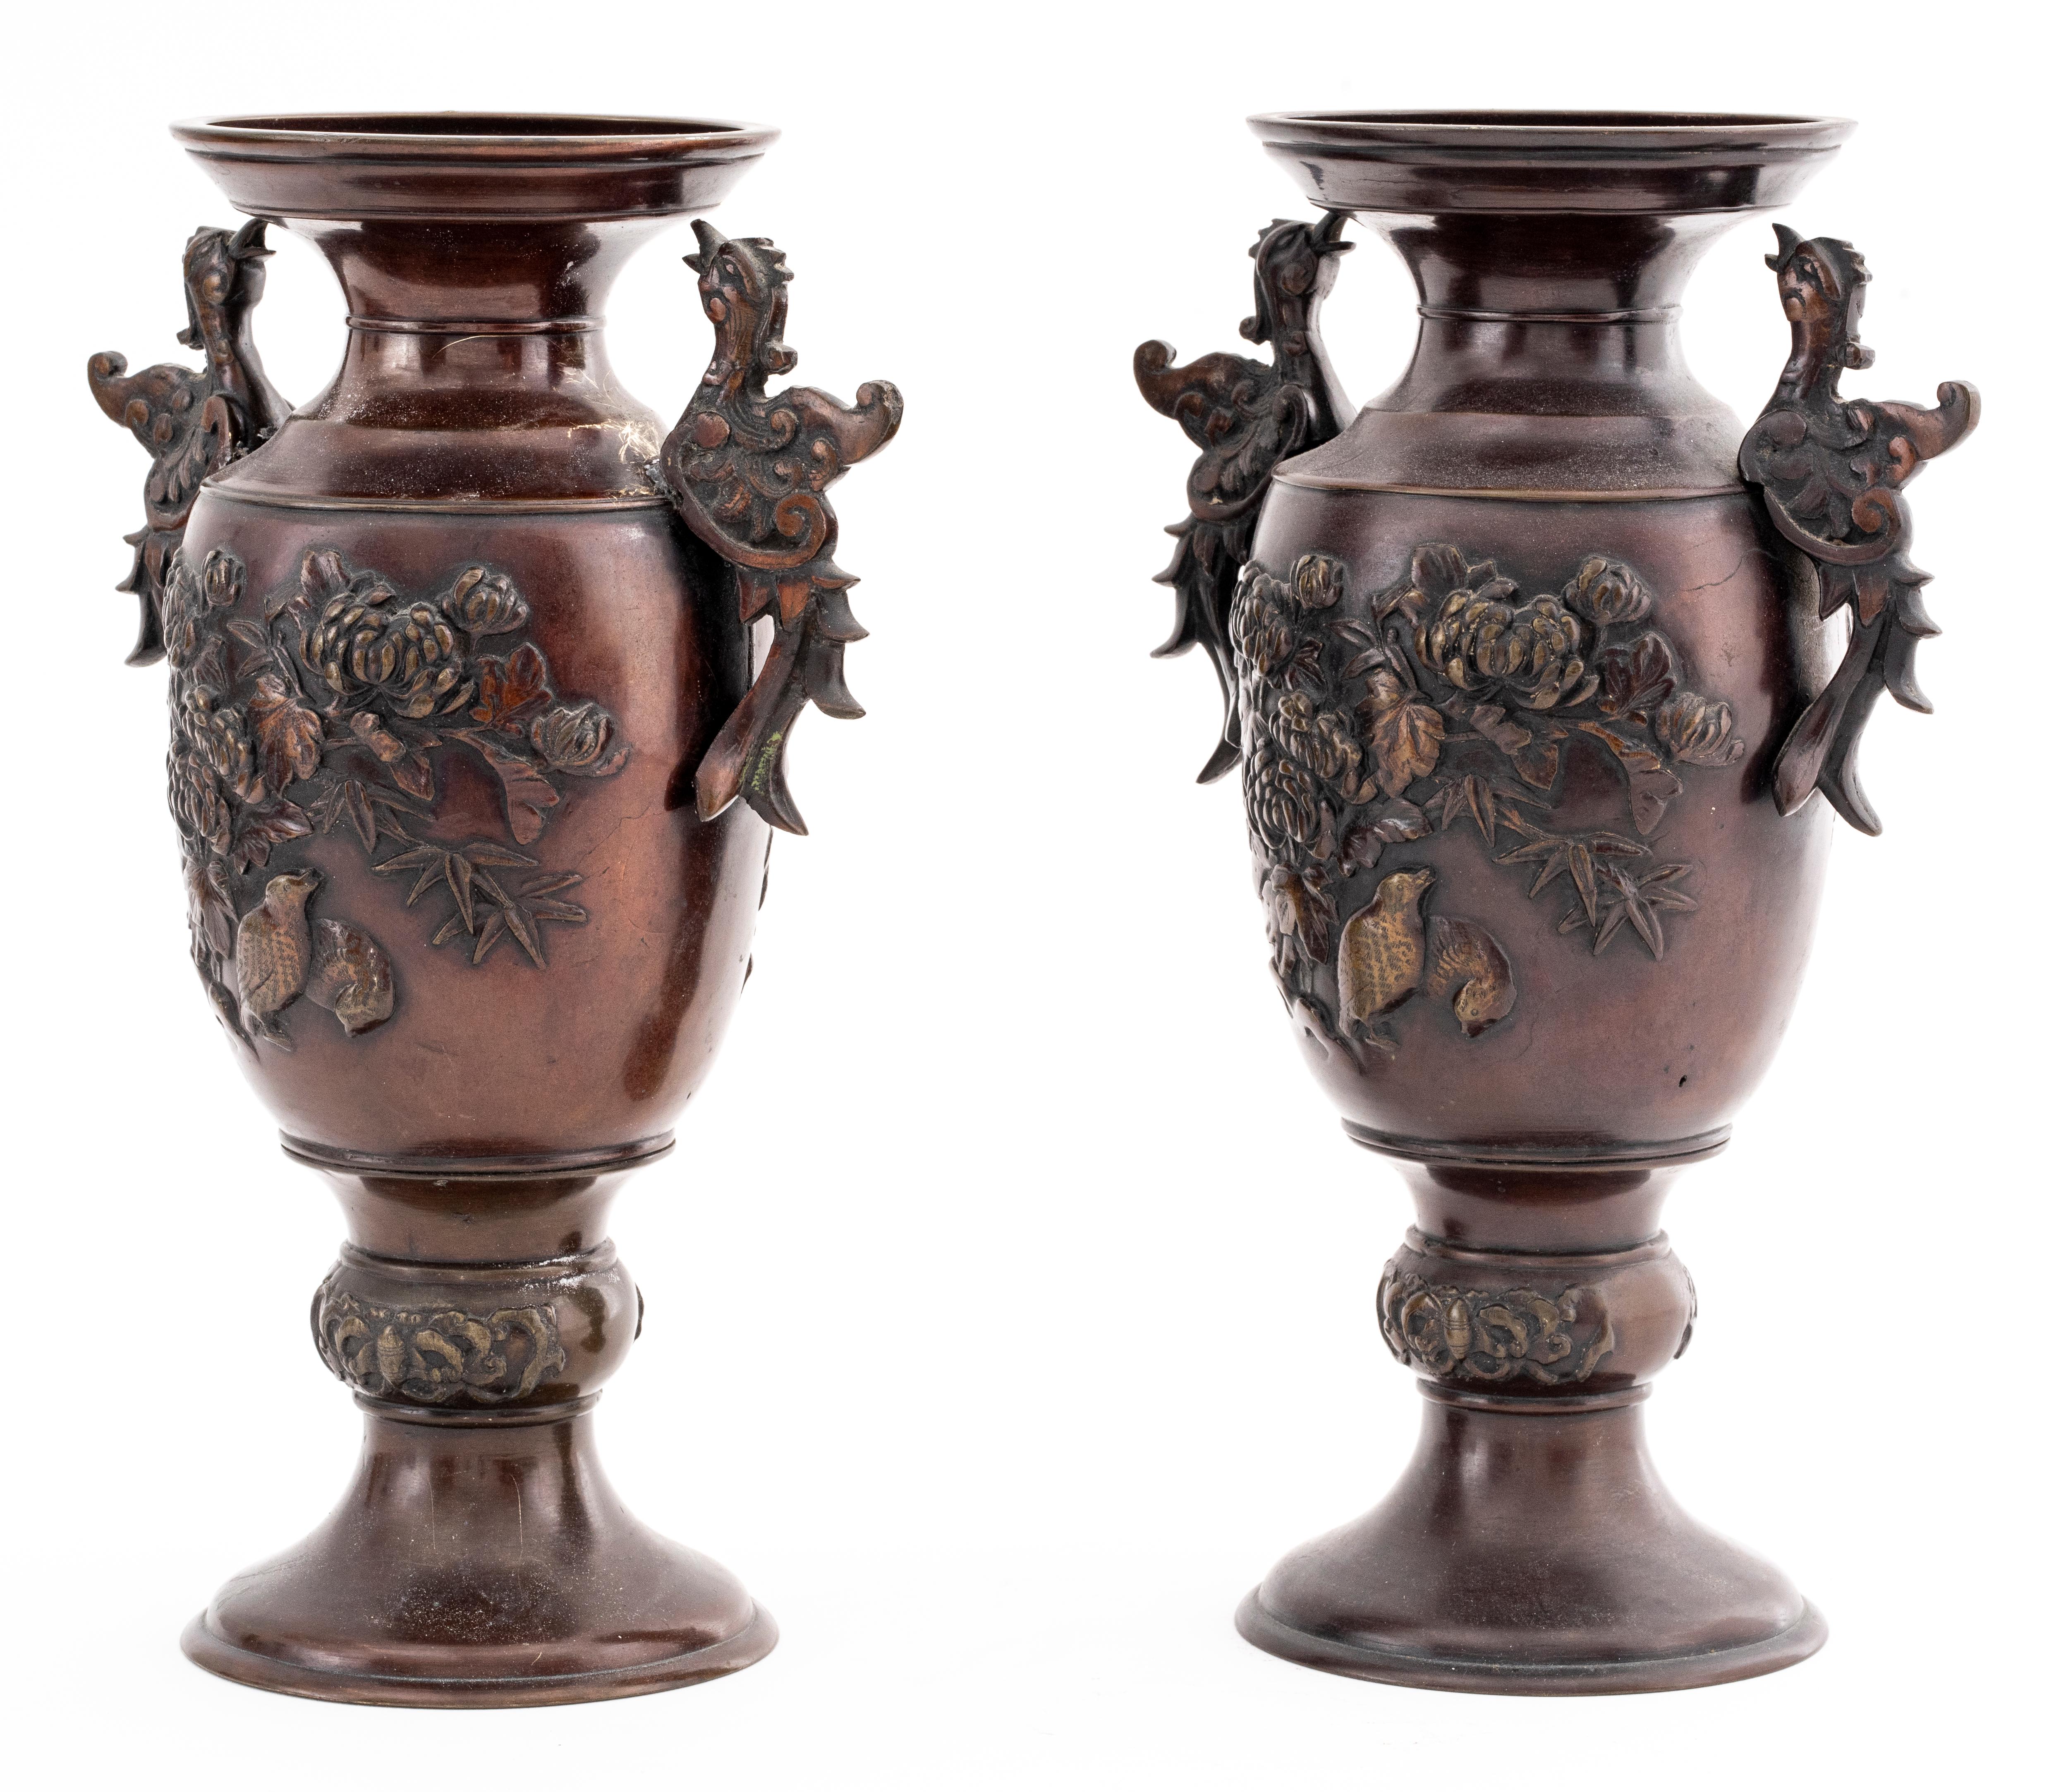 Pair of Japanese Meiji bronze vases, decorated with chrysanthemums and bird or phoenix handles, unmarked.